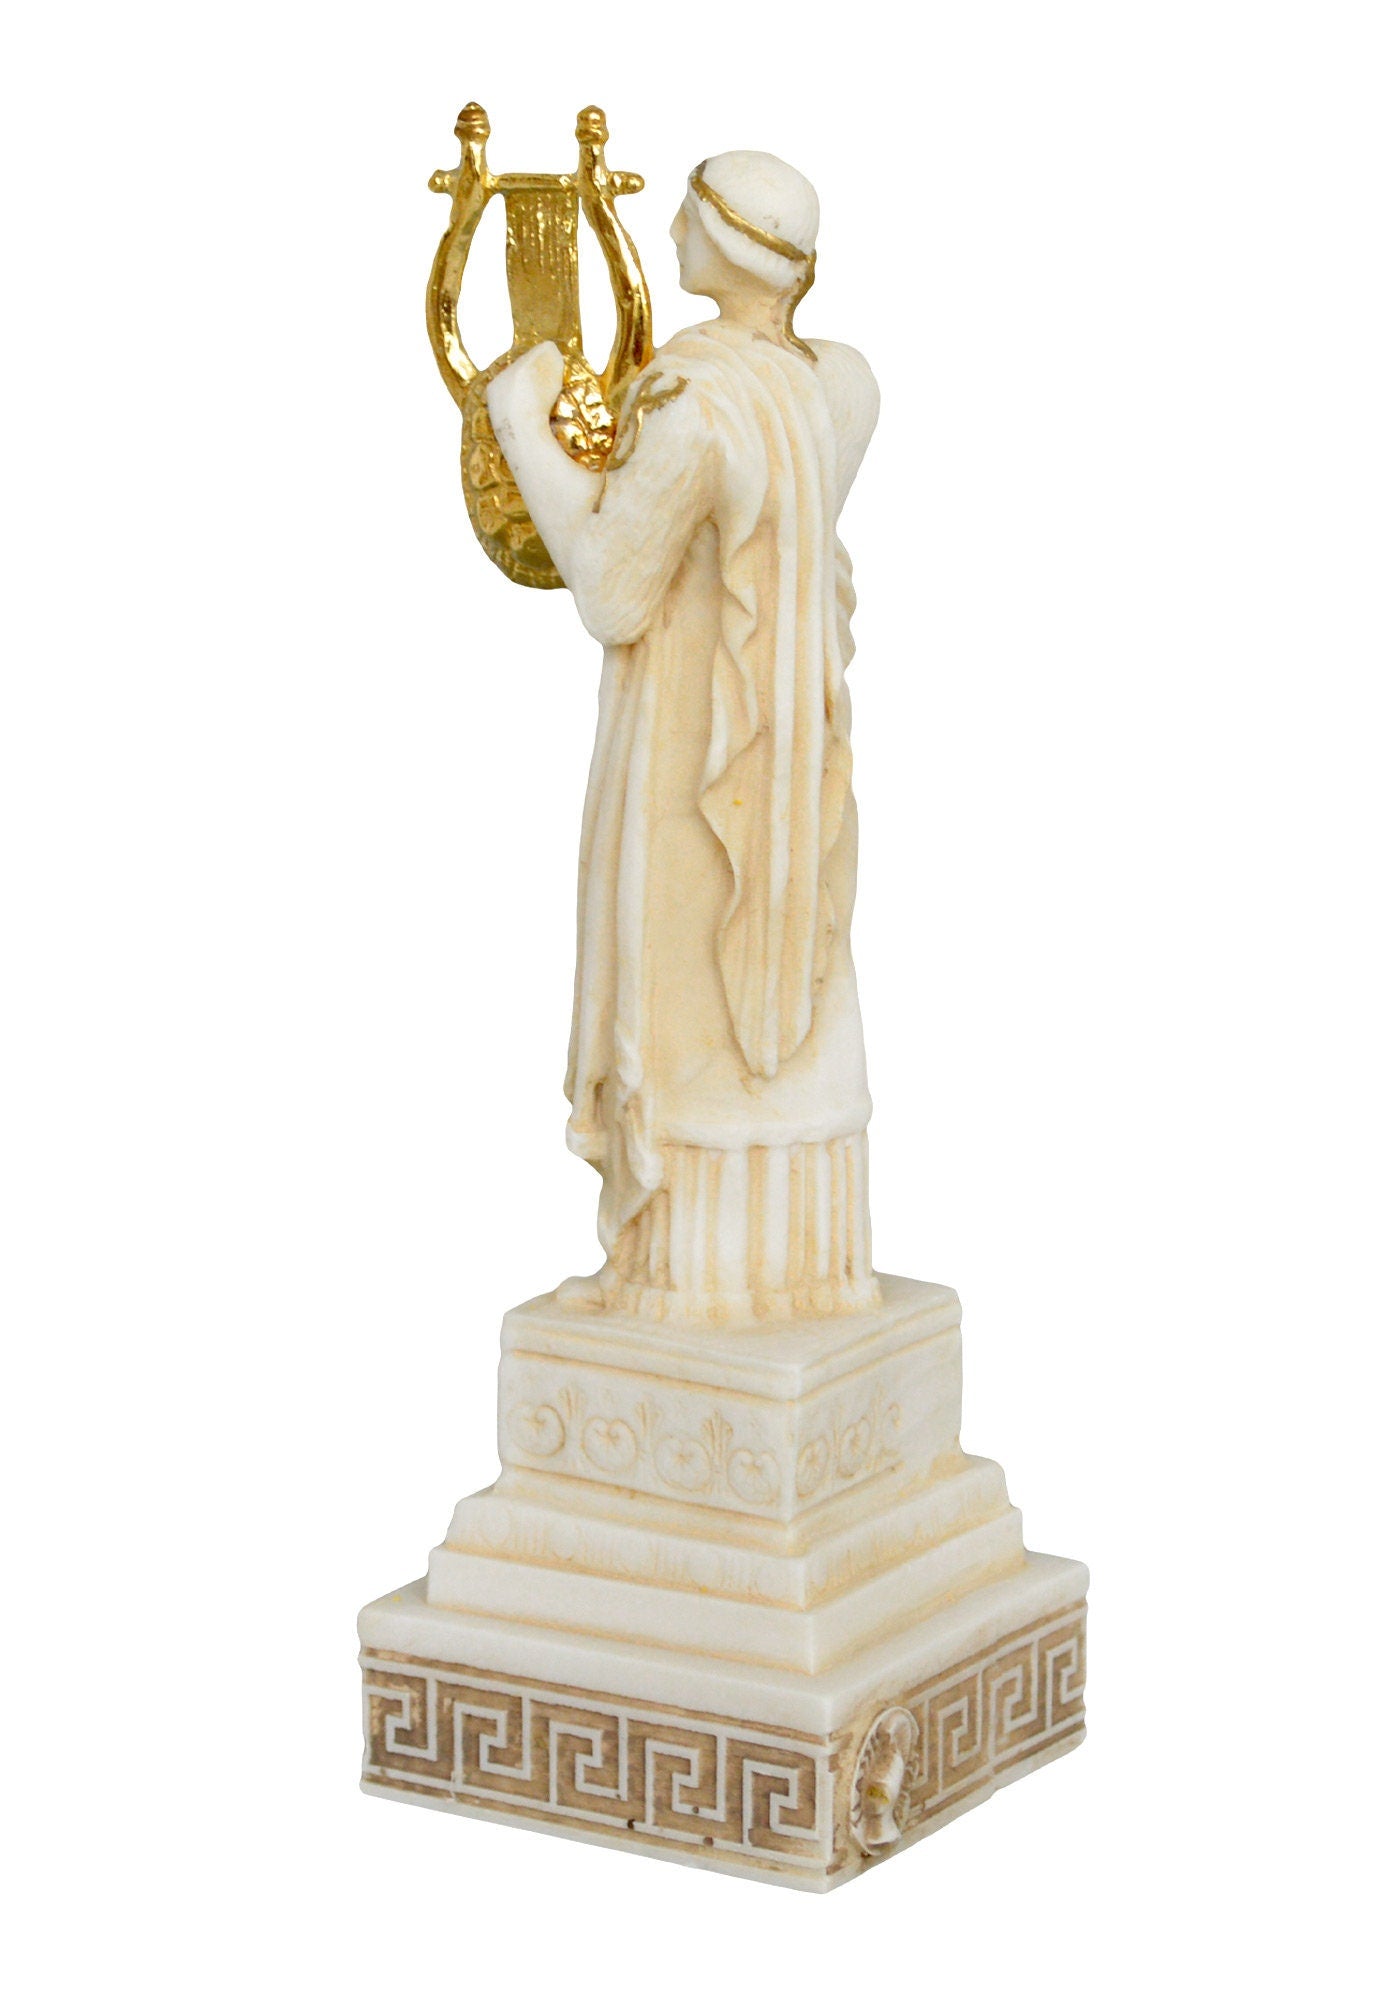 Apollo - Greek Roman God of the Sun,Light,Music,Poetry,Healing,Prophecy,Knowledge,Order,Beauty,Archery,Agriculture- Aged Alabaster Statue